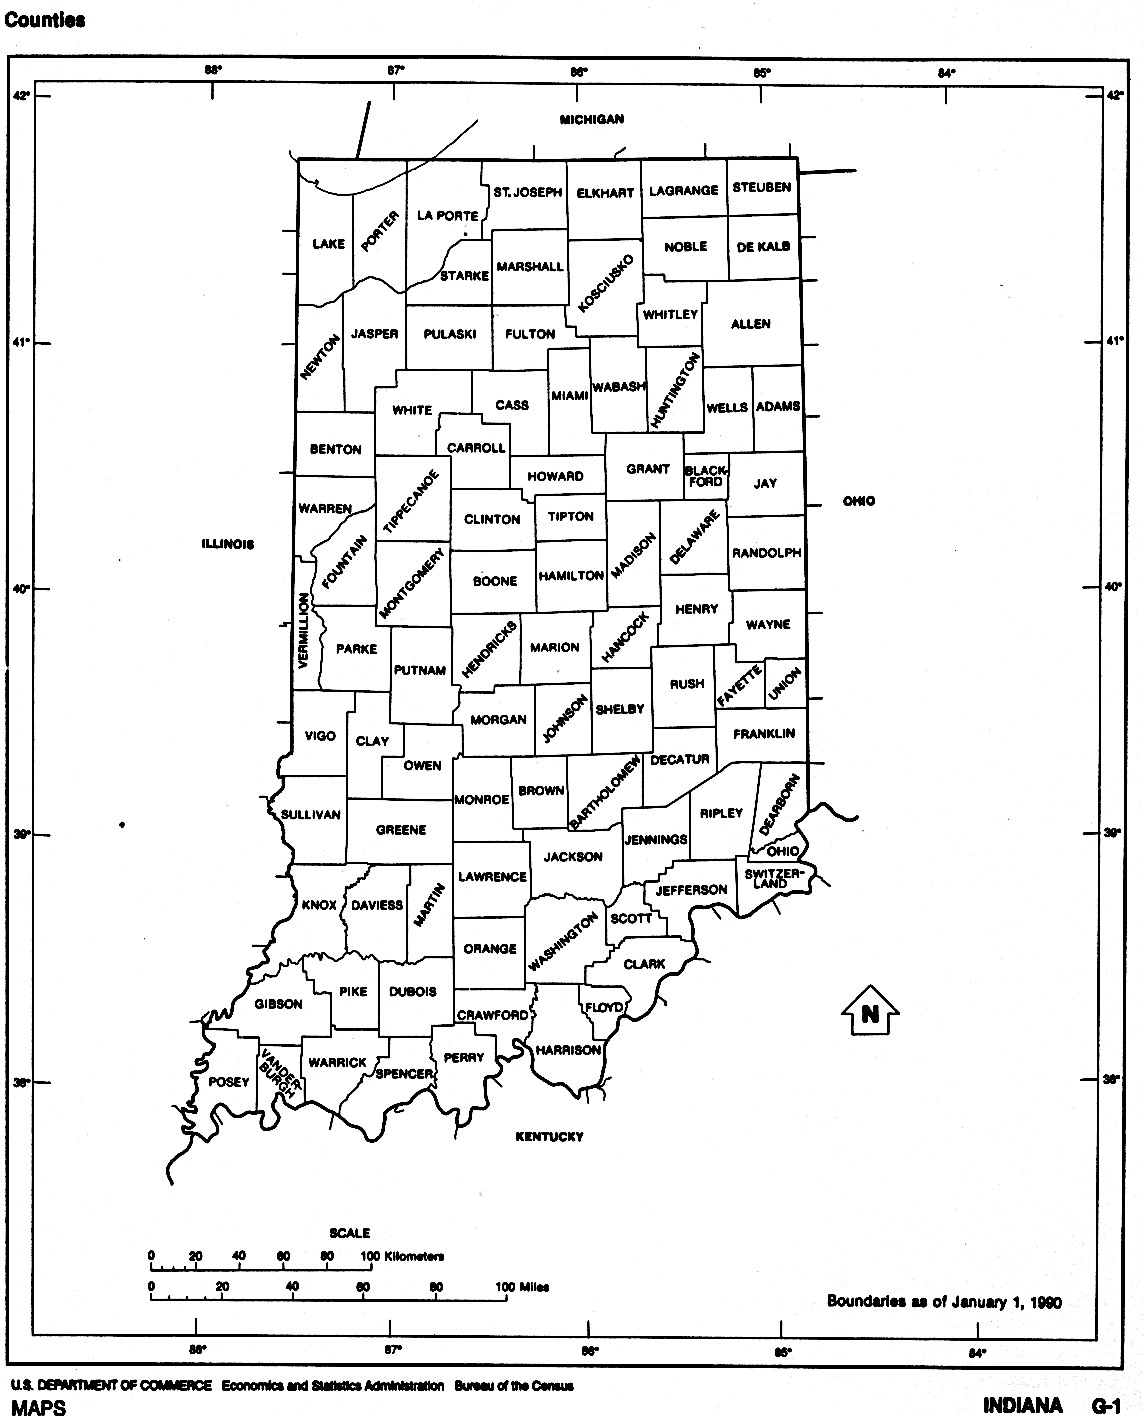 Indiana Counties map with outline of each county in IN